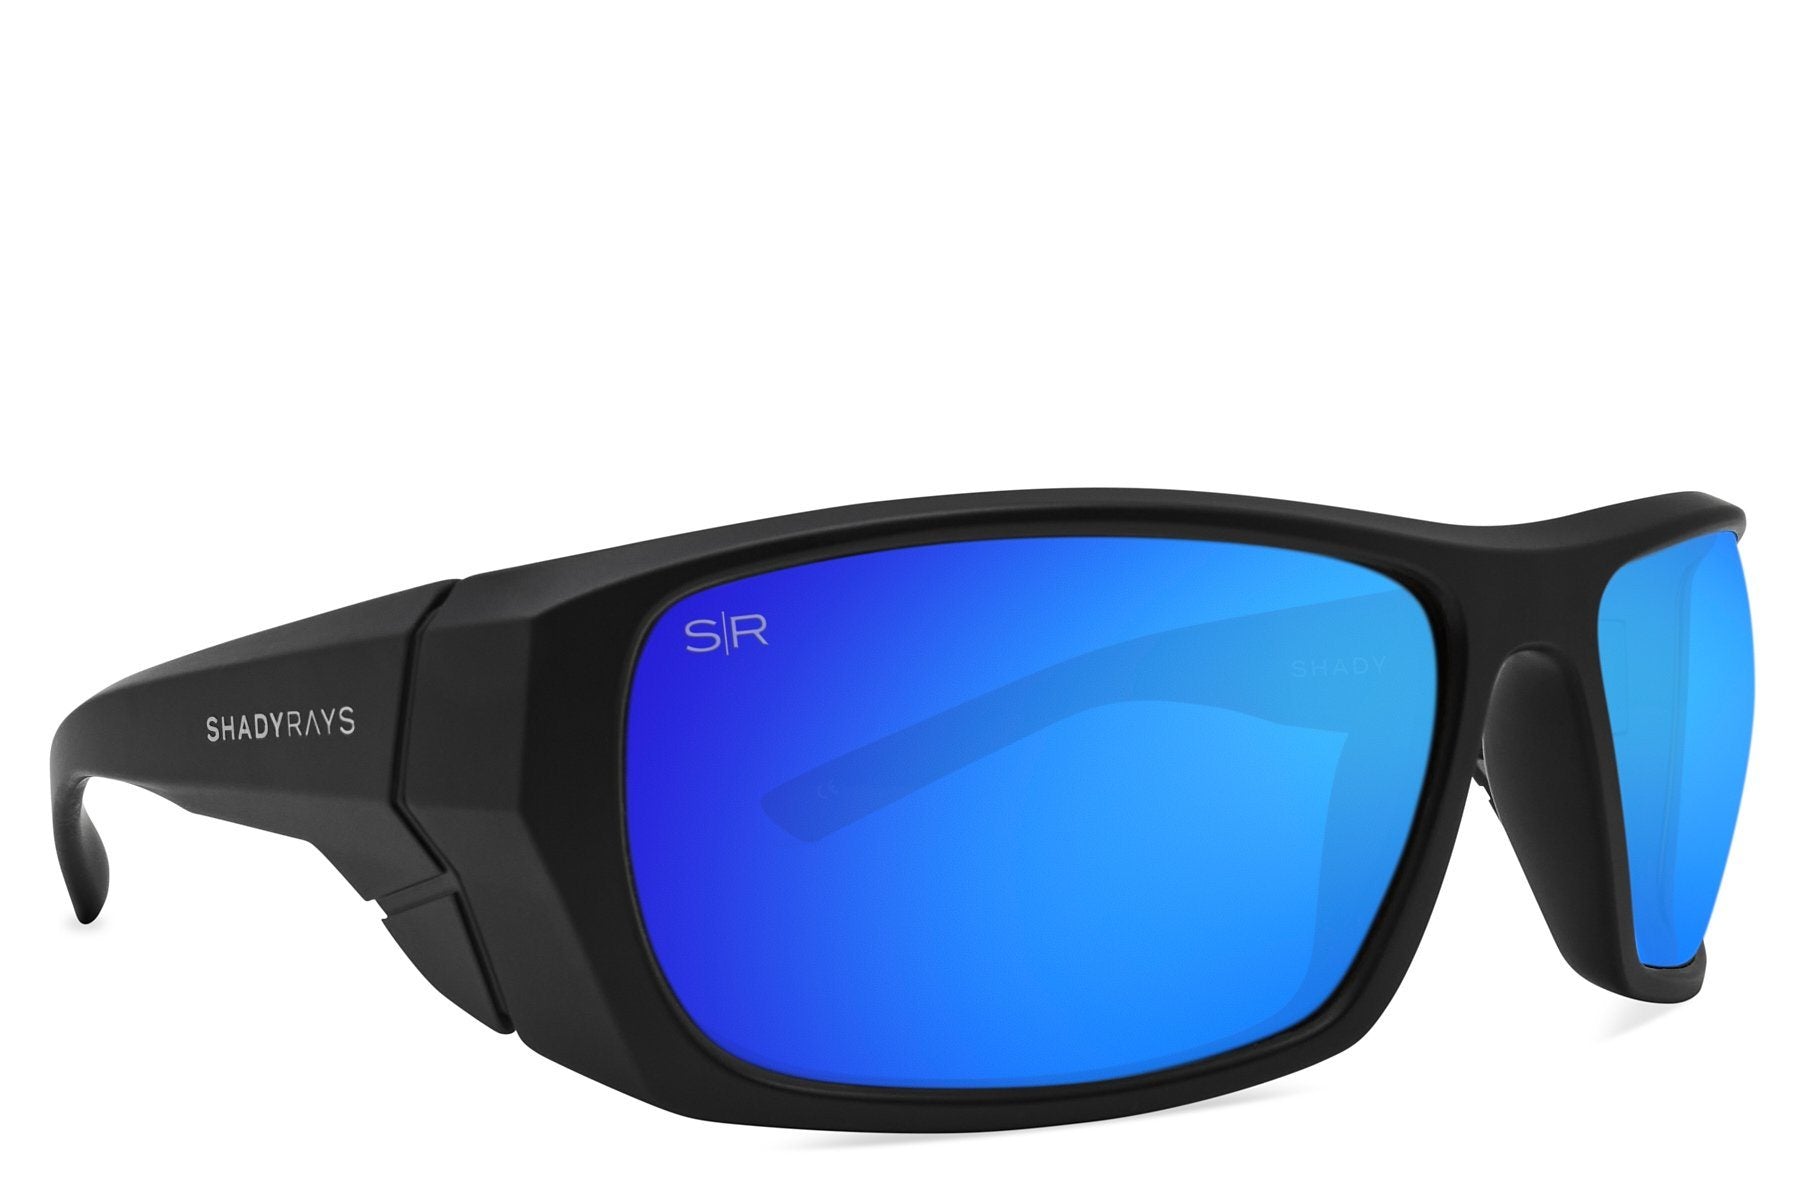 Terrain - Black Glacier Polarized Sunglasses | Matte Black Sunglasses | Best Christmas Gifts | Gifts for The Holidays | Unique Gifts for Friends